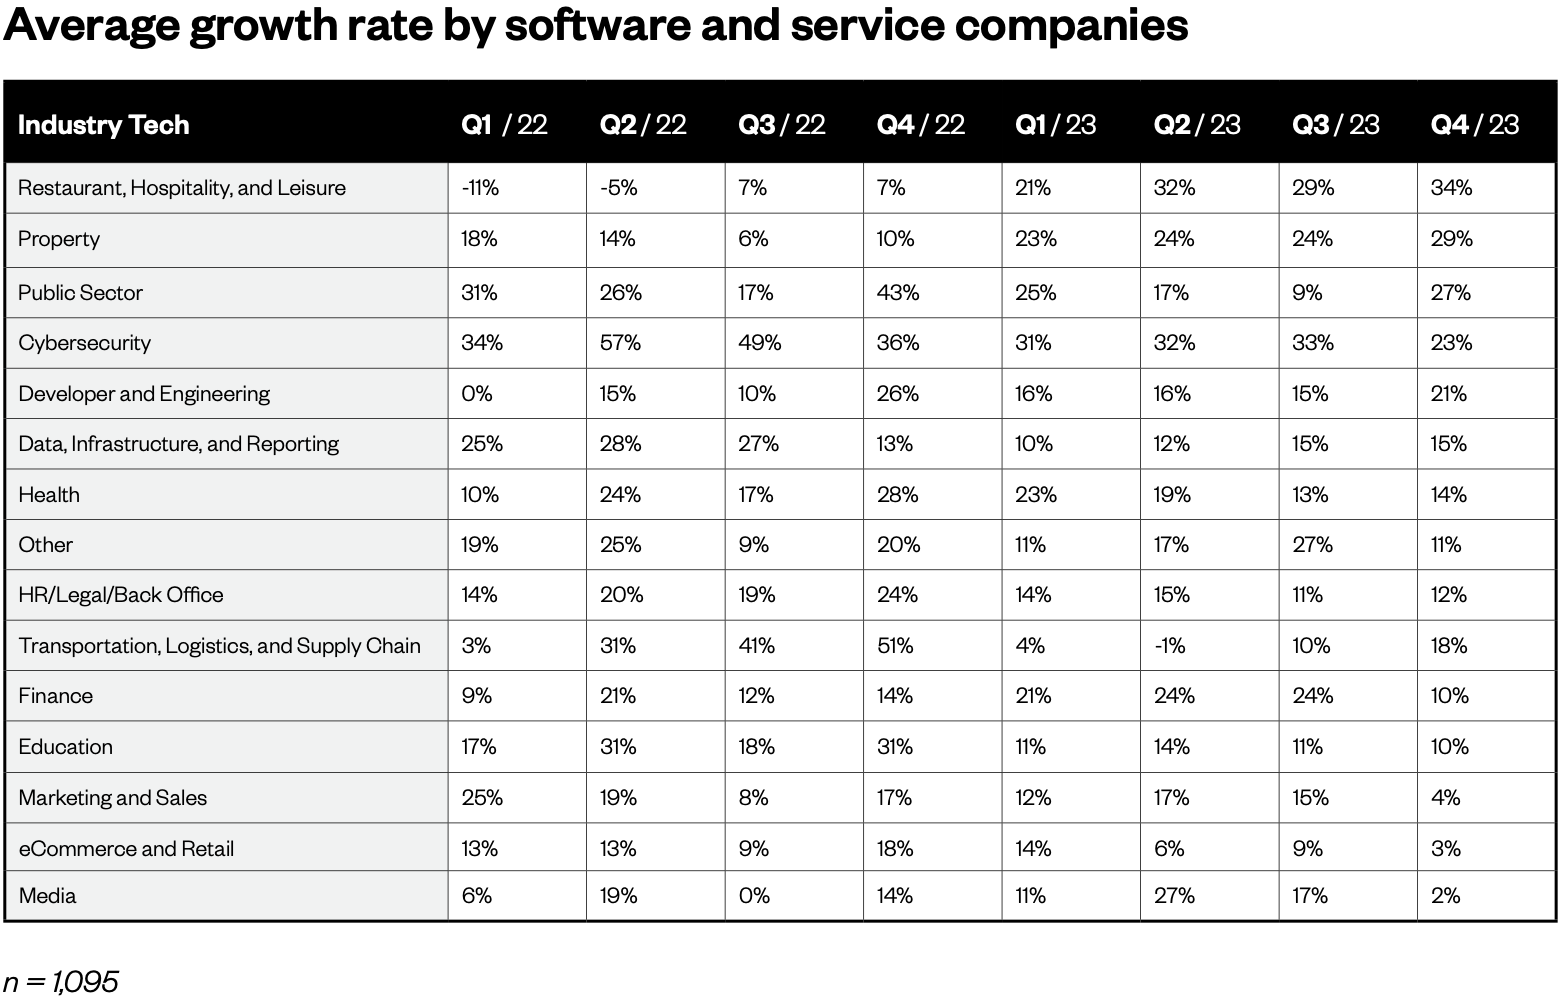 A chart showing the average growth rate by software and service companies from Q1 '22 to Q4 '23